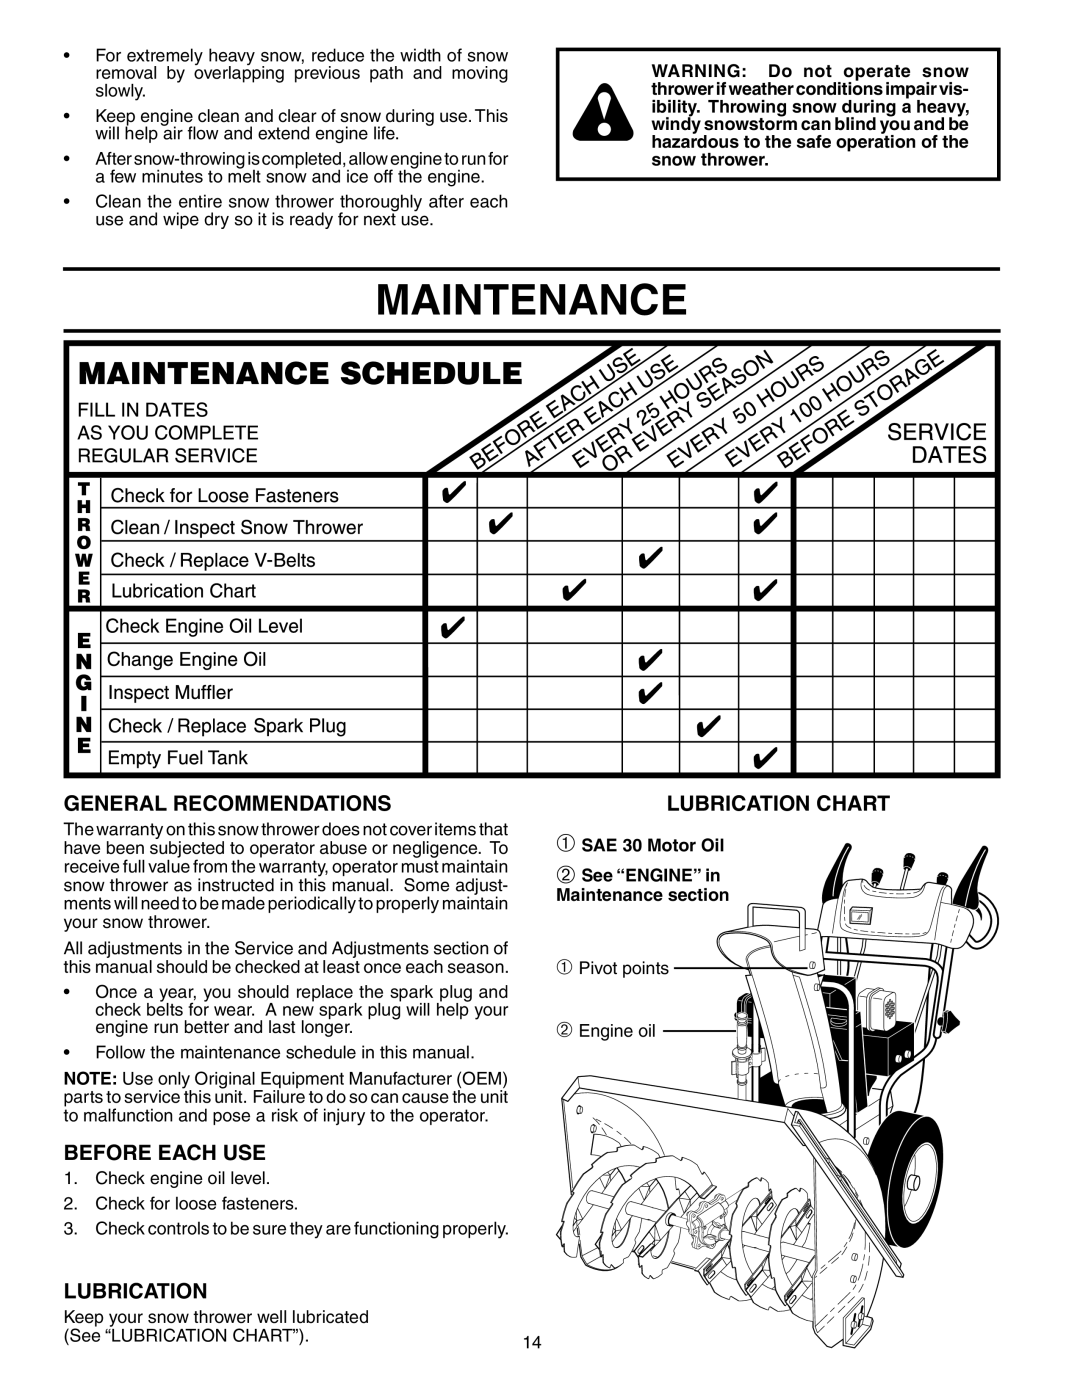 Husqvarna 1130STE XP Maintenance, General Recommendations, Before Each Use, Lubrication Chart, ➀SAE 30 Motor Oil 